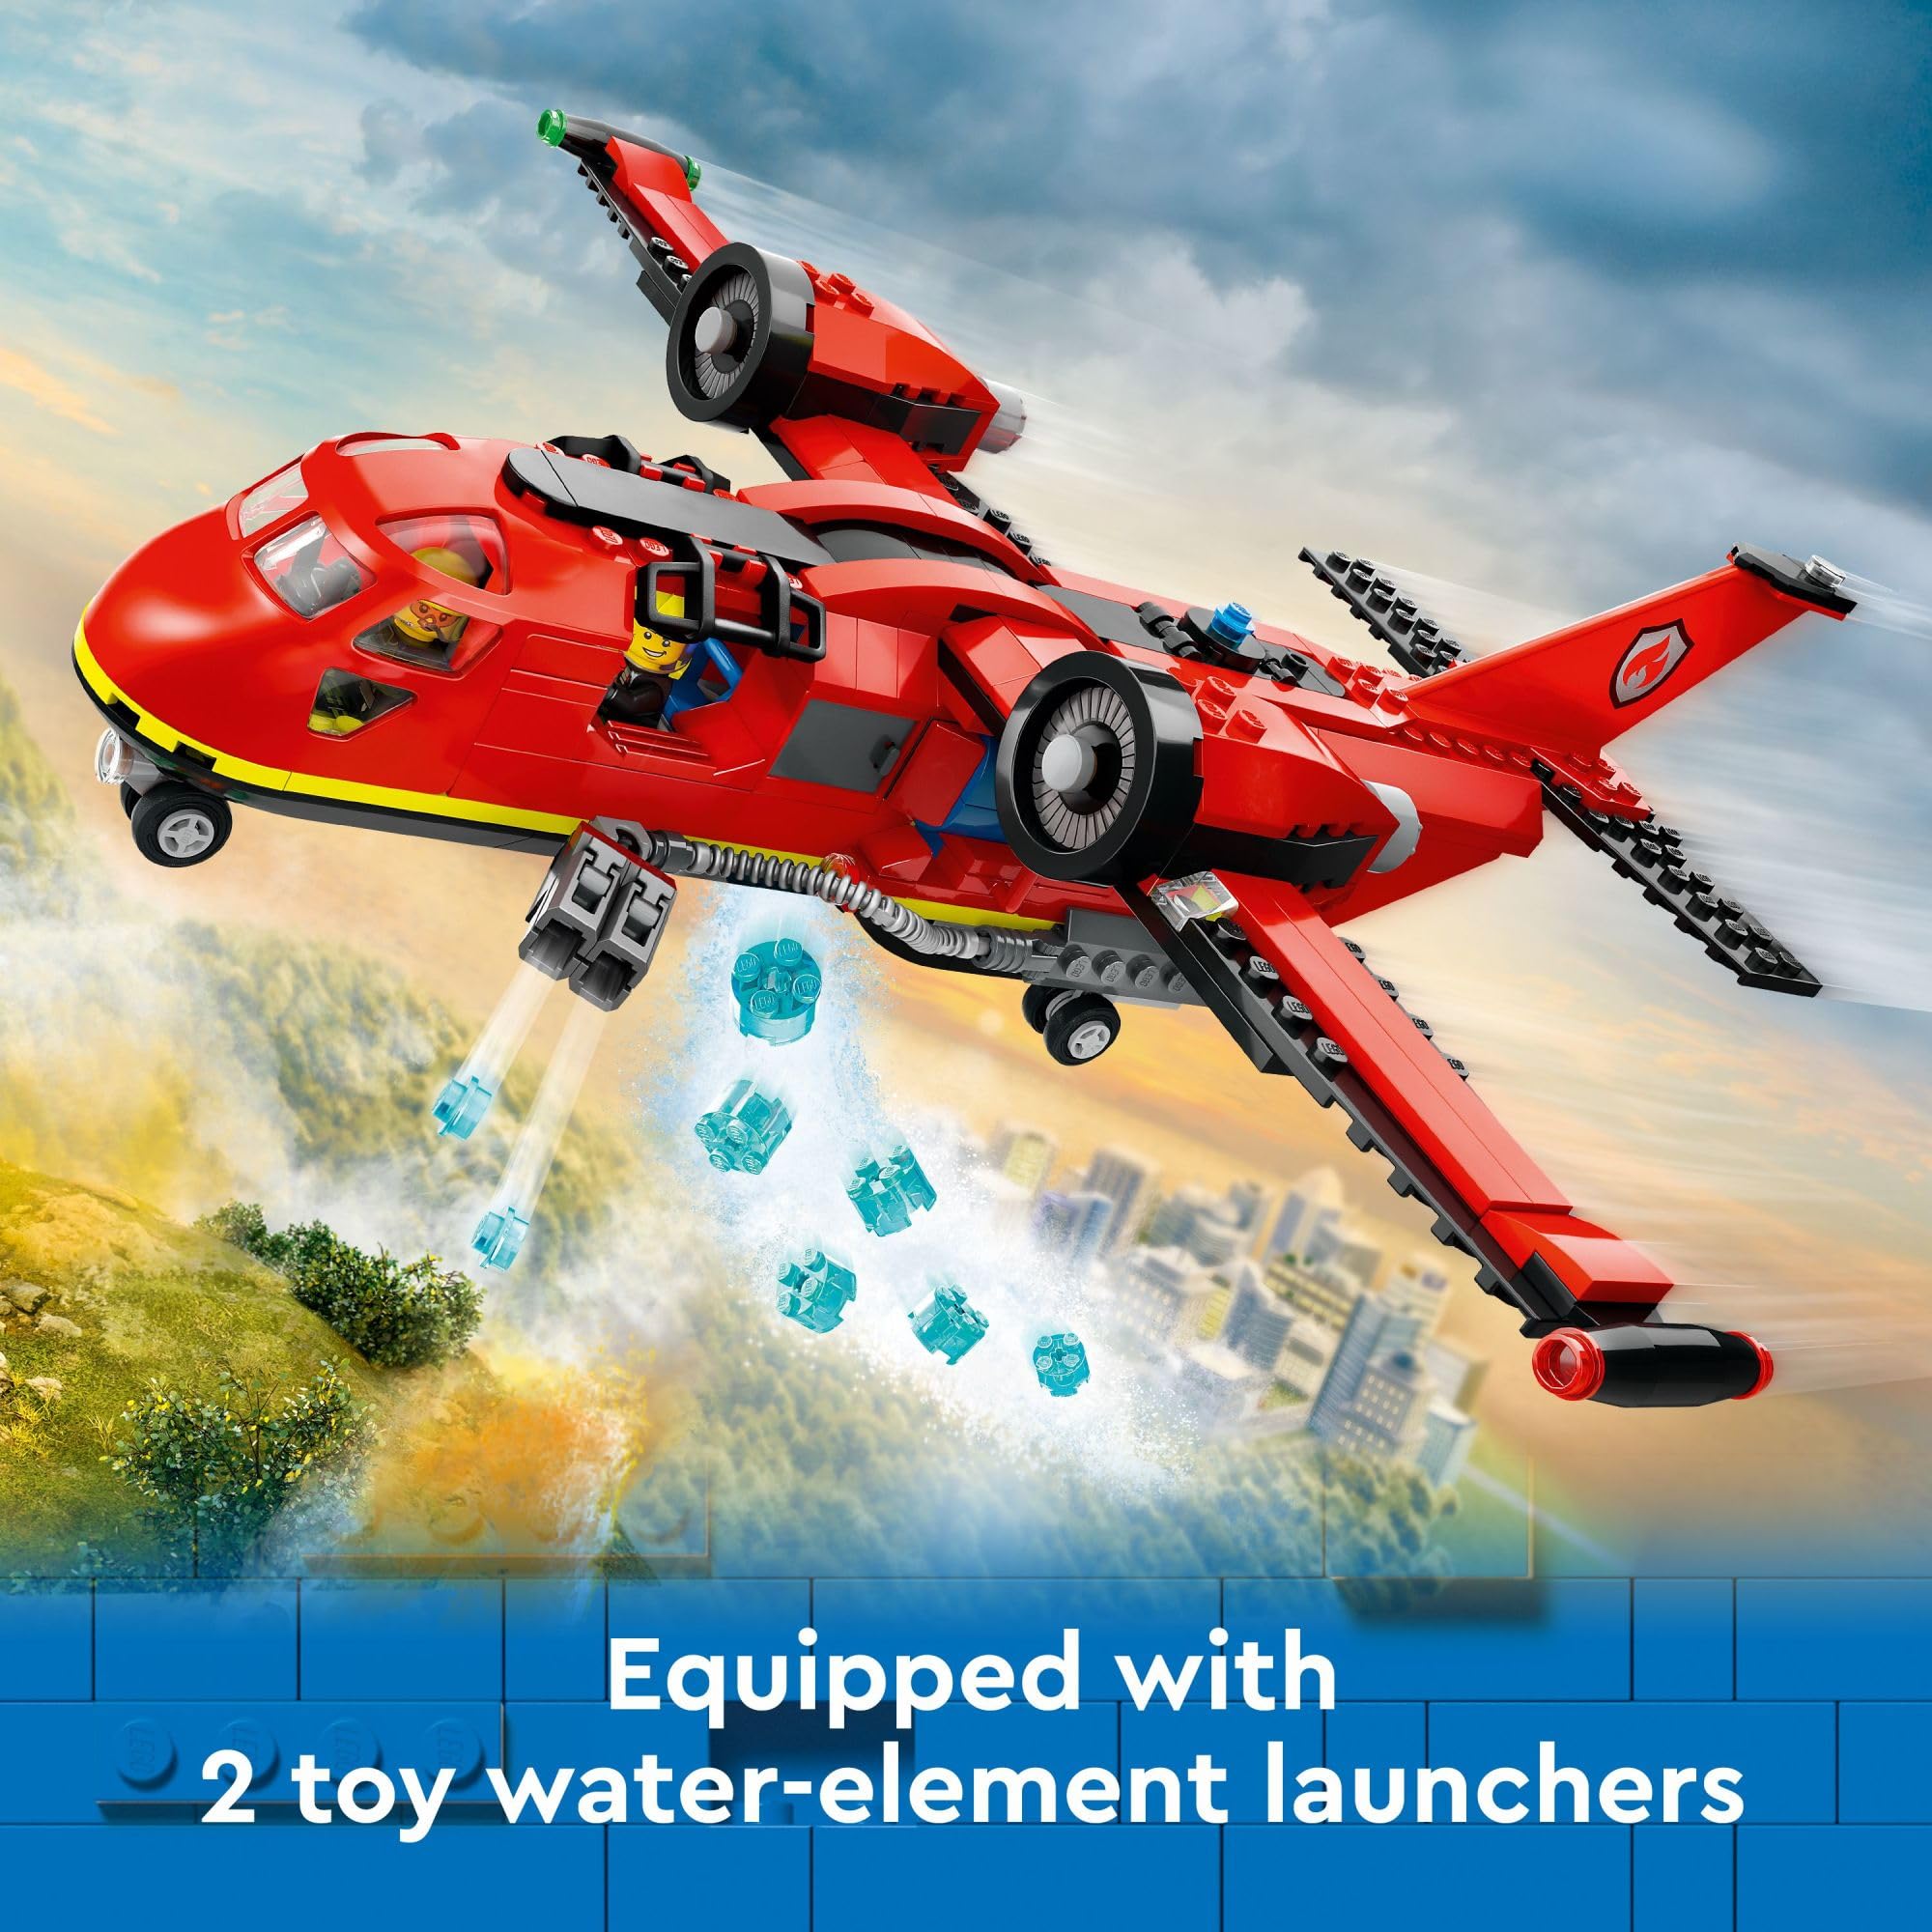 LEGO City Fire Rescue Plane Toy for Kids and Fans of Firefighter Toys, Fun Birthday Gift Idea for Boys and Girls Ages 6+ who Love Airplane Toys and Imaginative Play, Includes 3 Minifigures, 60413